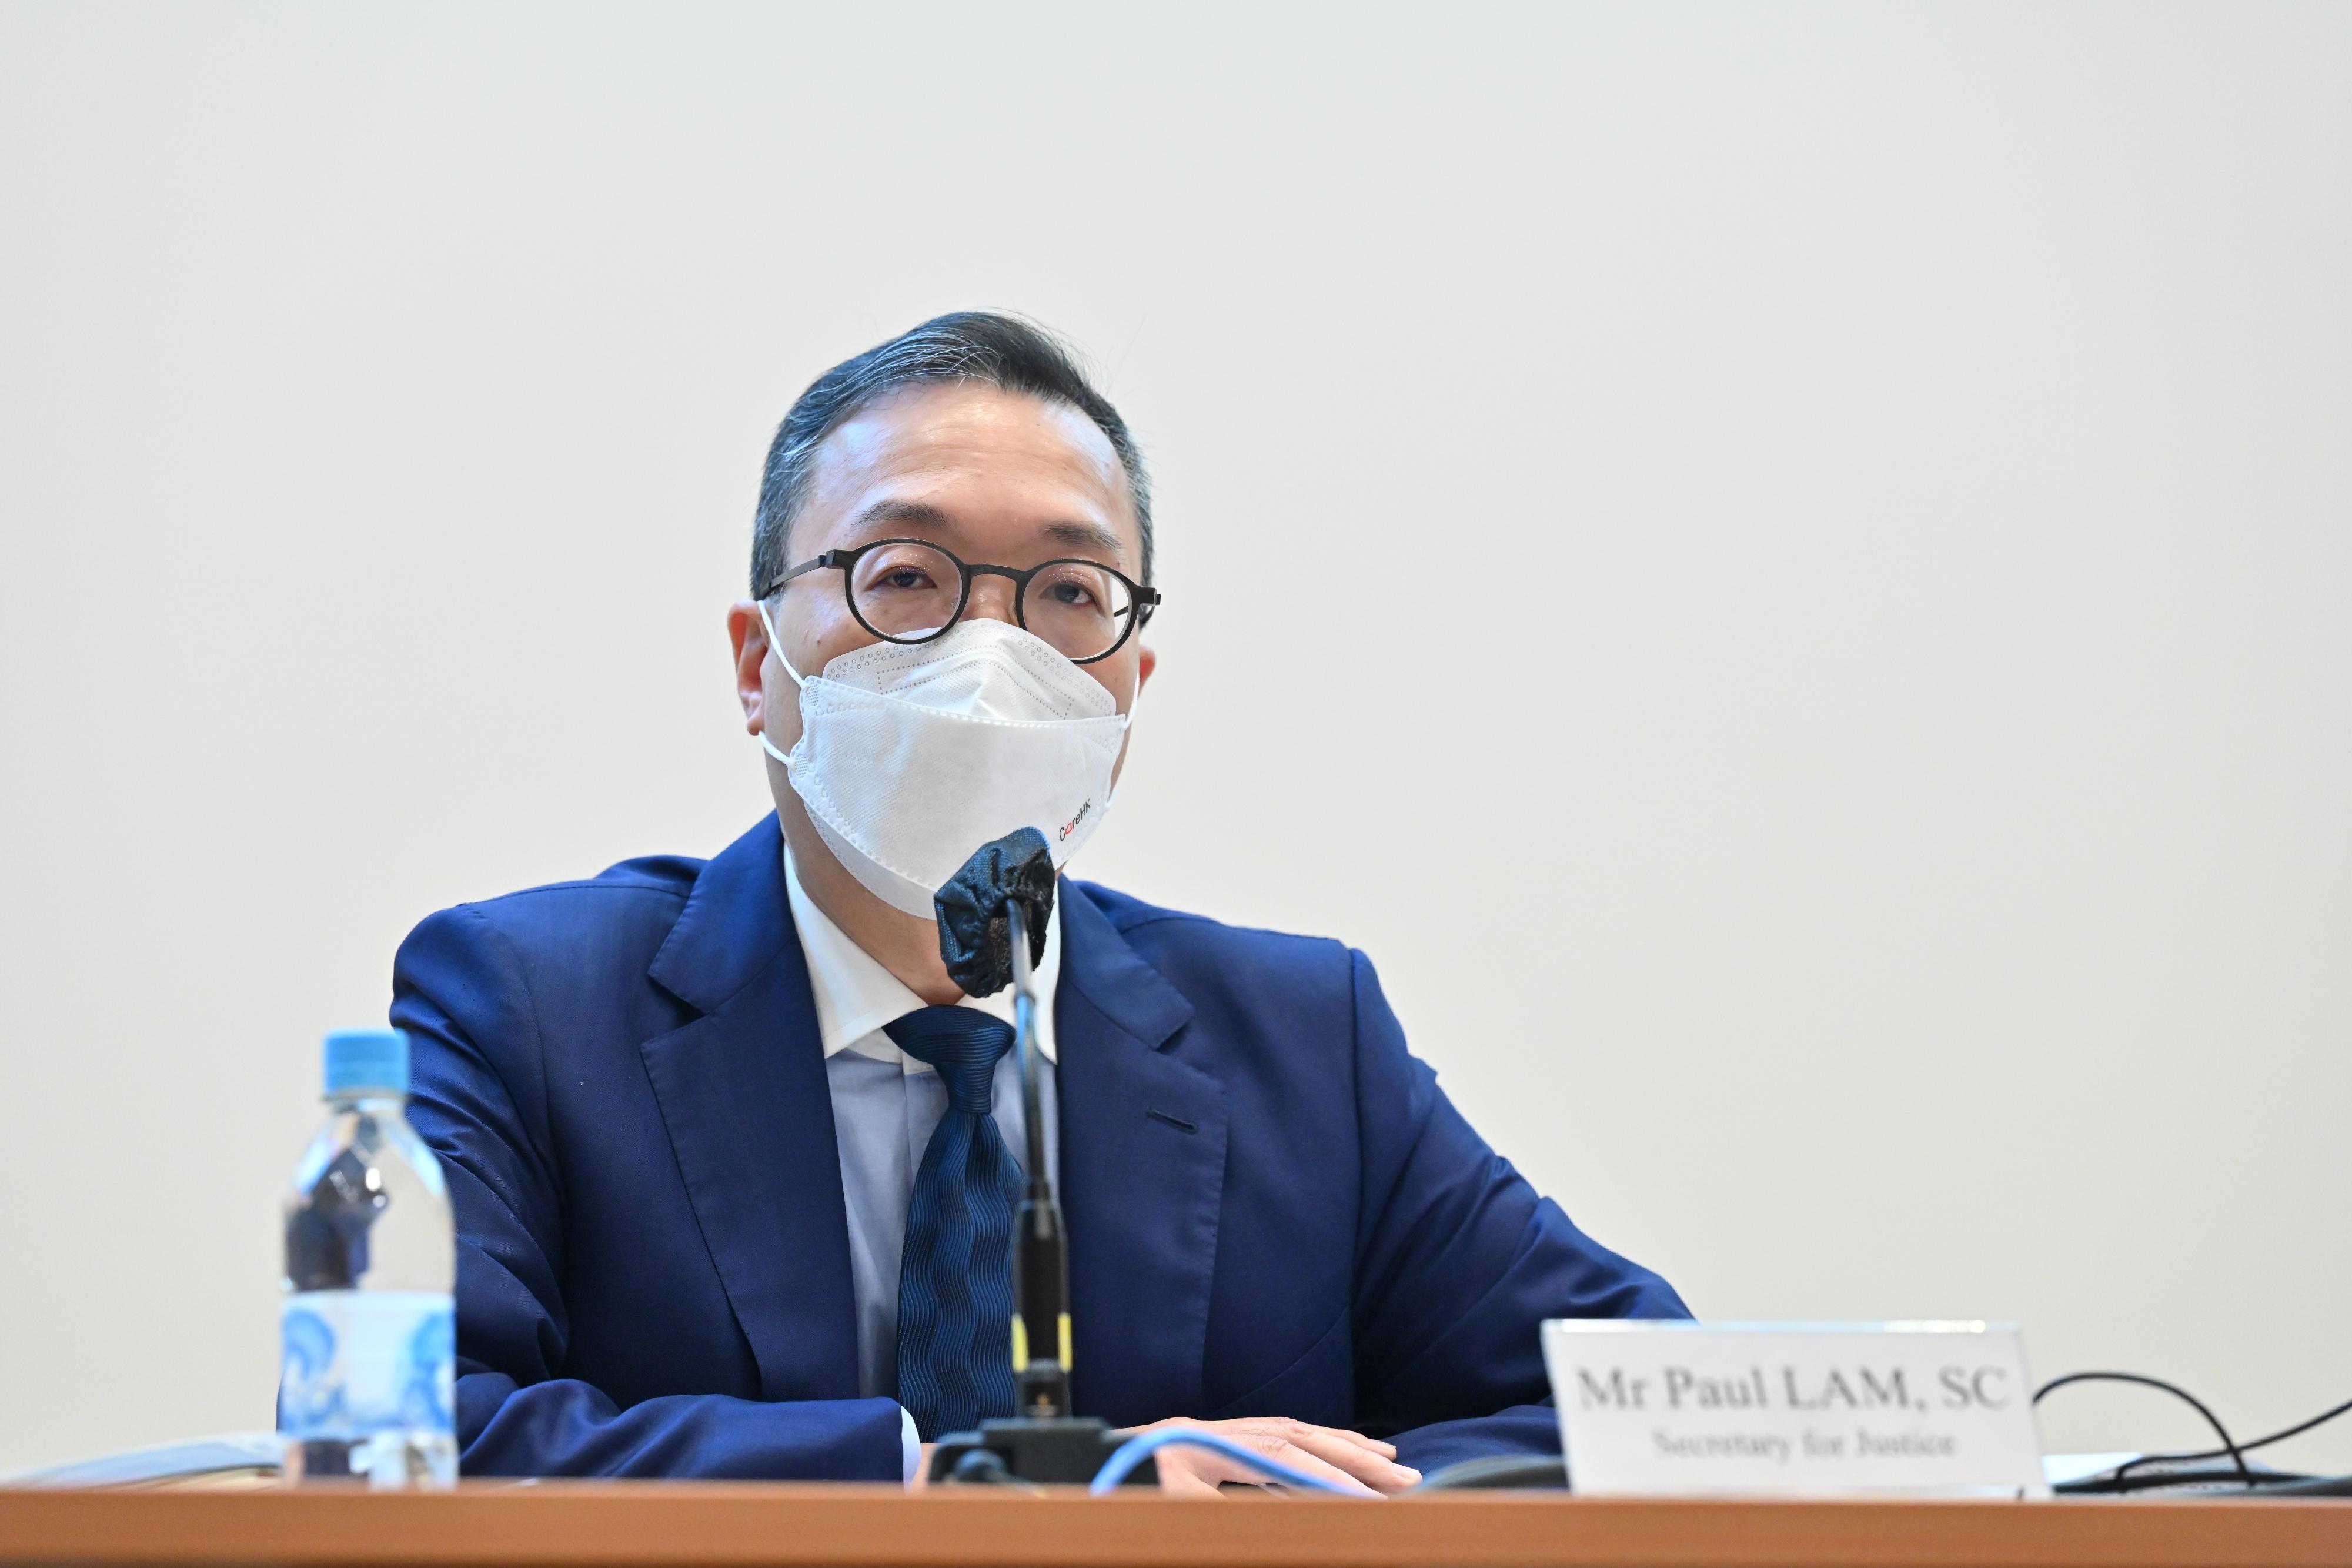 The Department of Justice today (July 29) held two sessions on "Spirit of the President's Important Speech" at Justice Place, where about 100 directorate officials attended. Photo shows the Secretary for Justice, Mr Paul Lam, SC, speaking at one of the sessions.